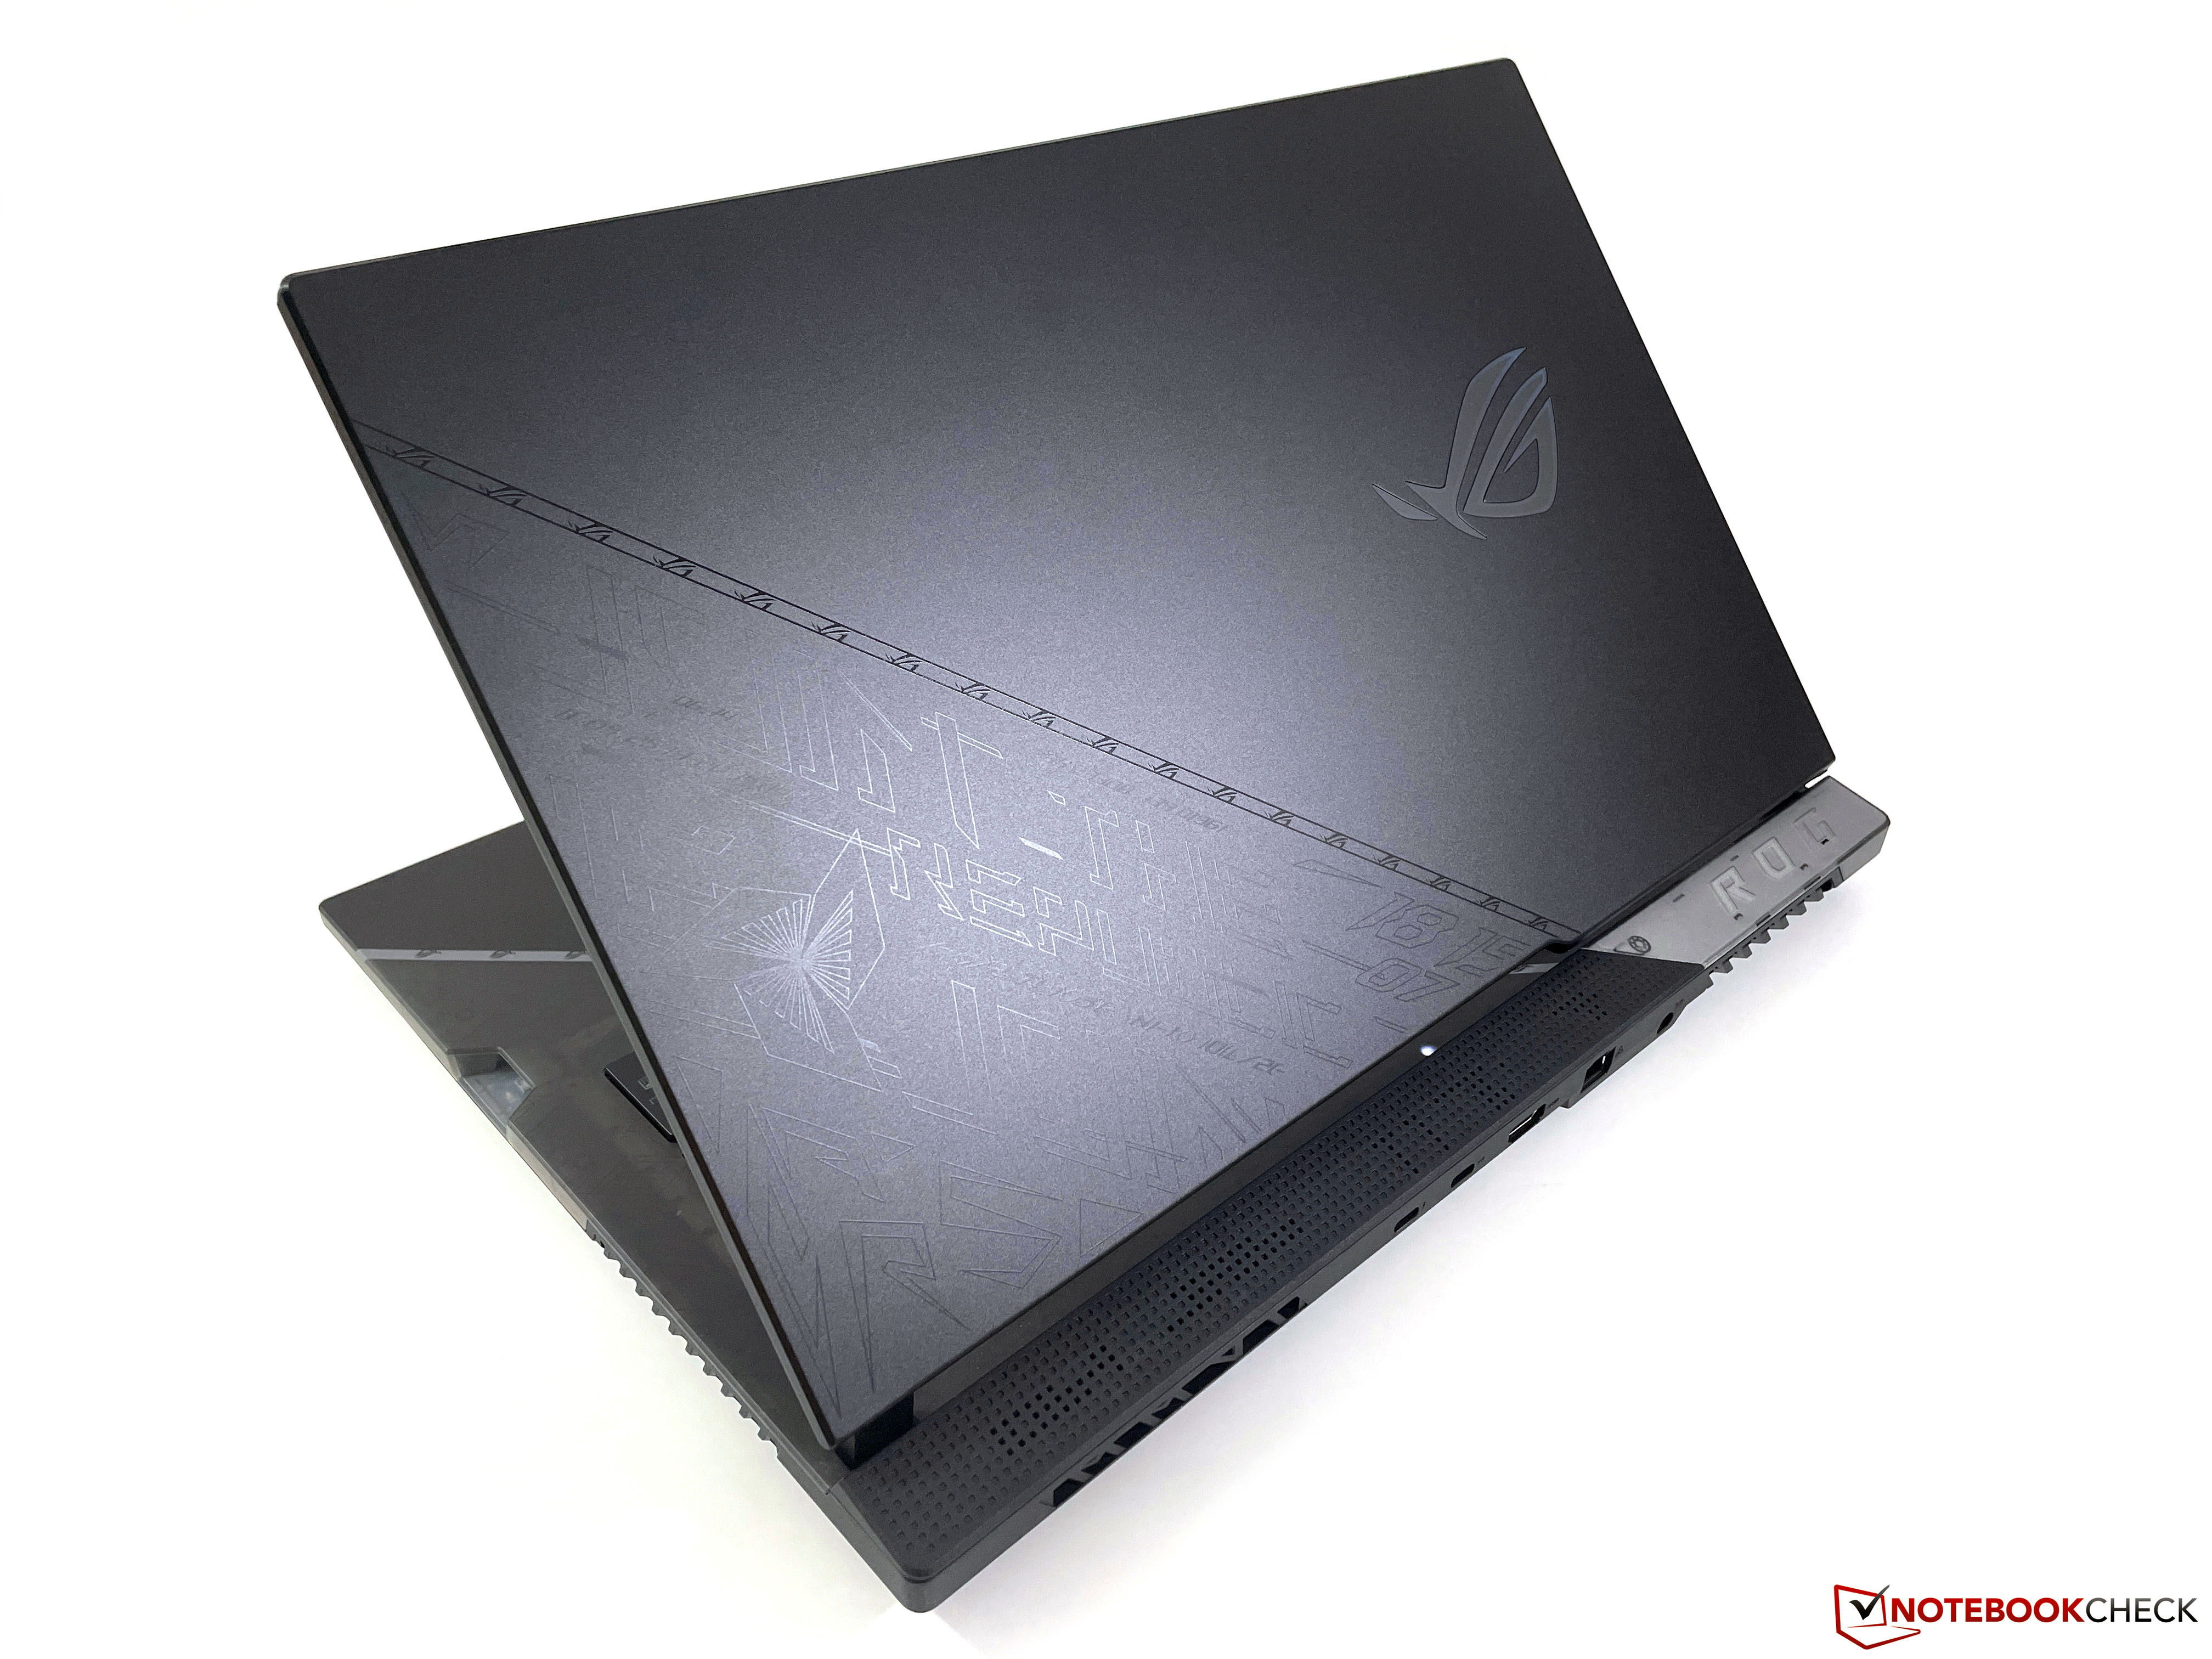 Asus Rog Strix Scar 17 Se Review Fully Equipped Gaming Laptop With Rtx 3080 Ti Notebookcheck Net Reviews